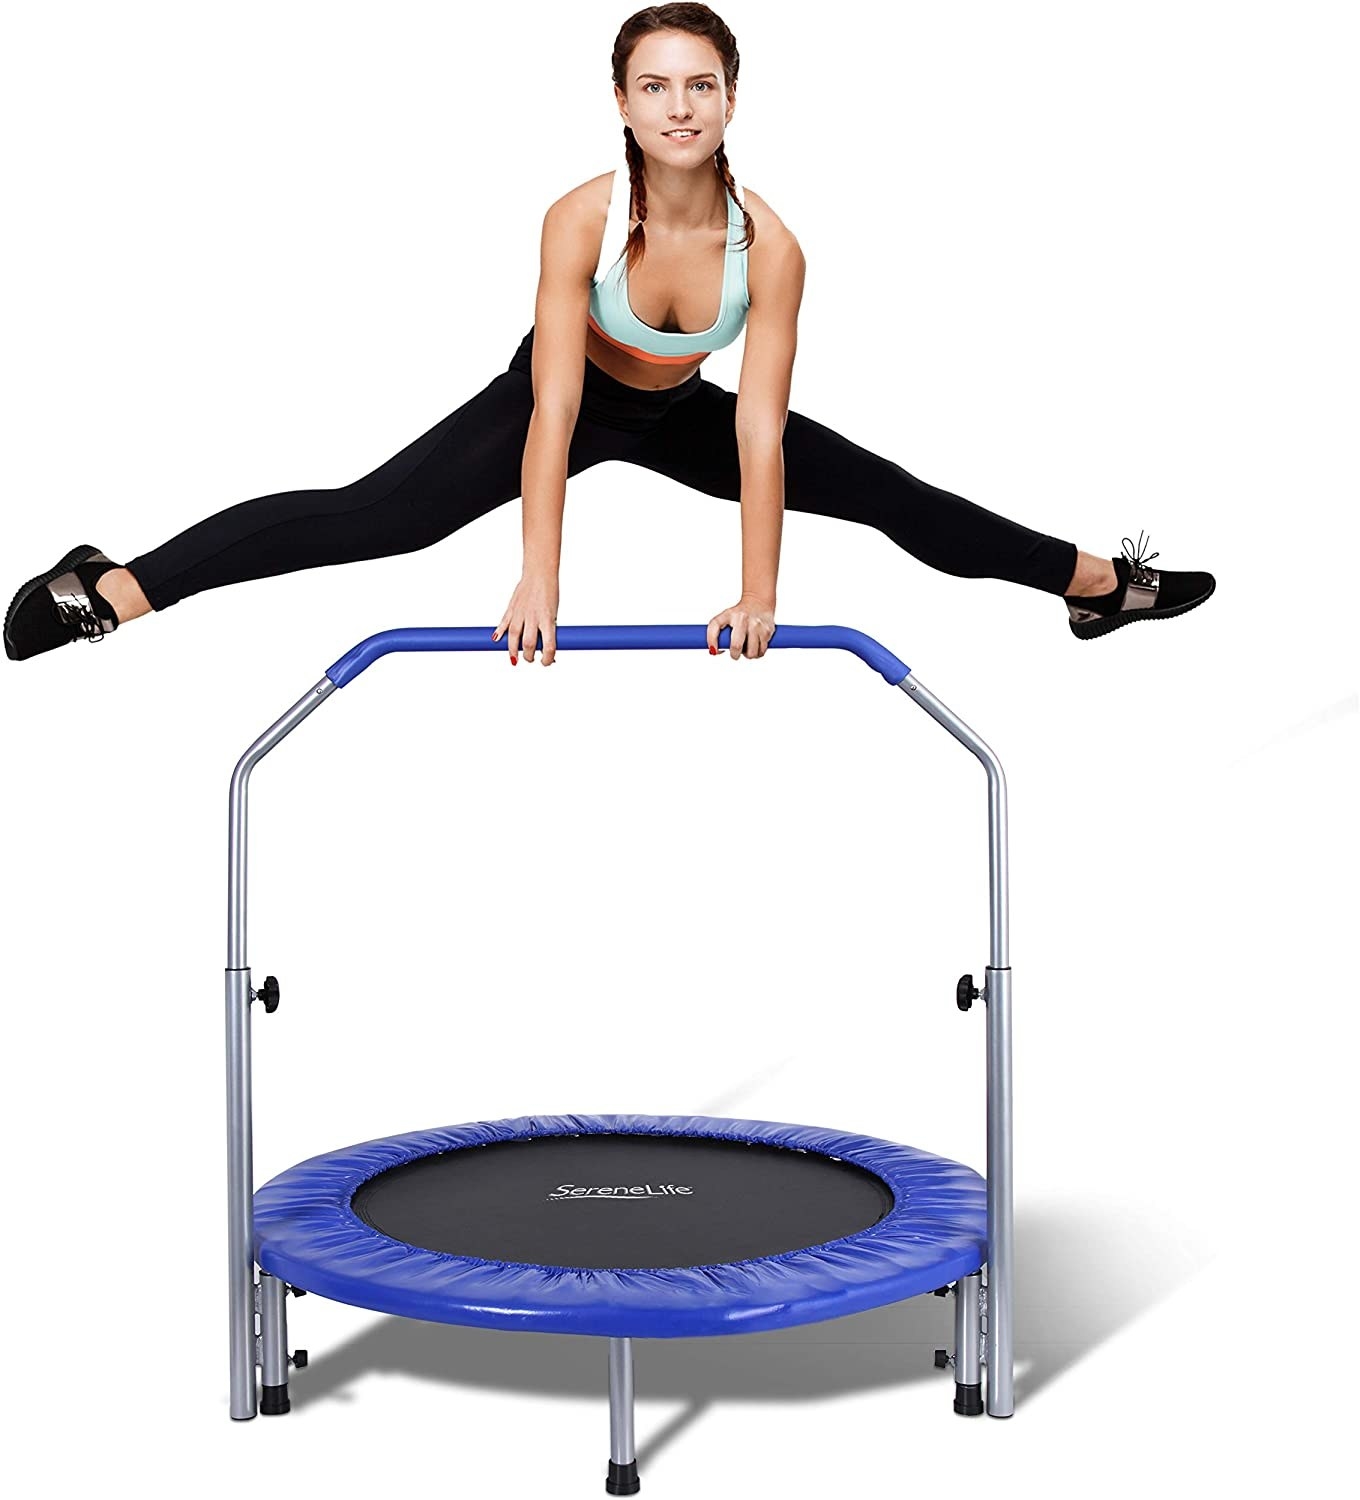 26 Pieces Of Indoor Workout Equipment So You Don't Have To Go Out In The Cold